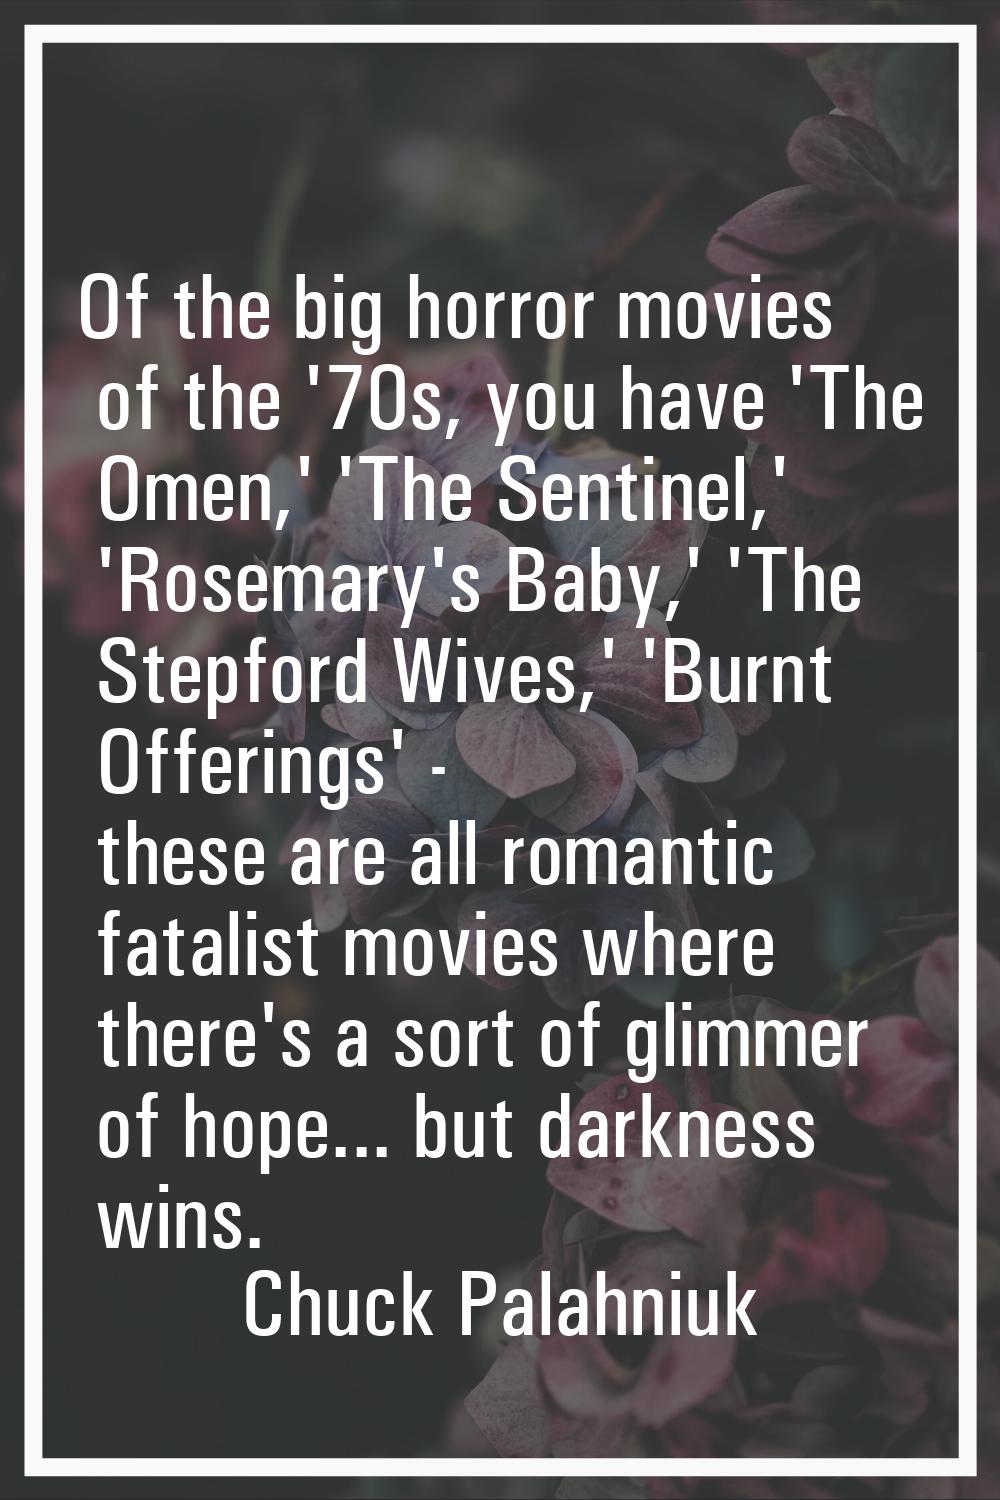 Of the big horror movies of the '70s, you have 'The Omen,' 'The Sentinel,' 'Rosemary's Baby,' 'The 